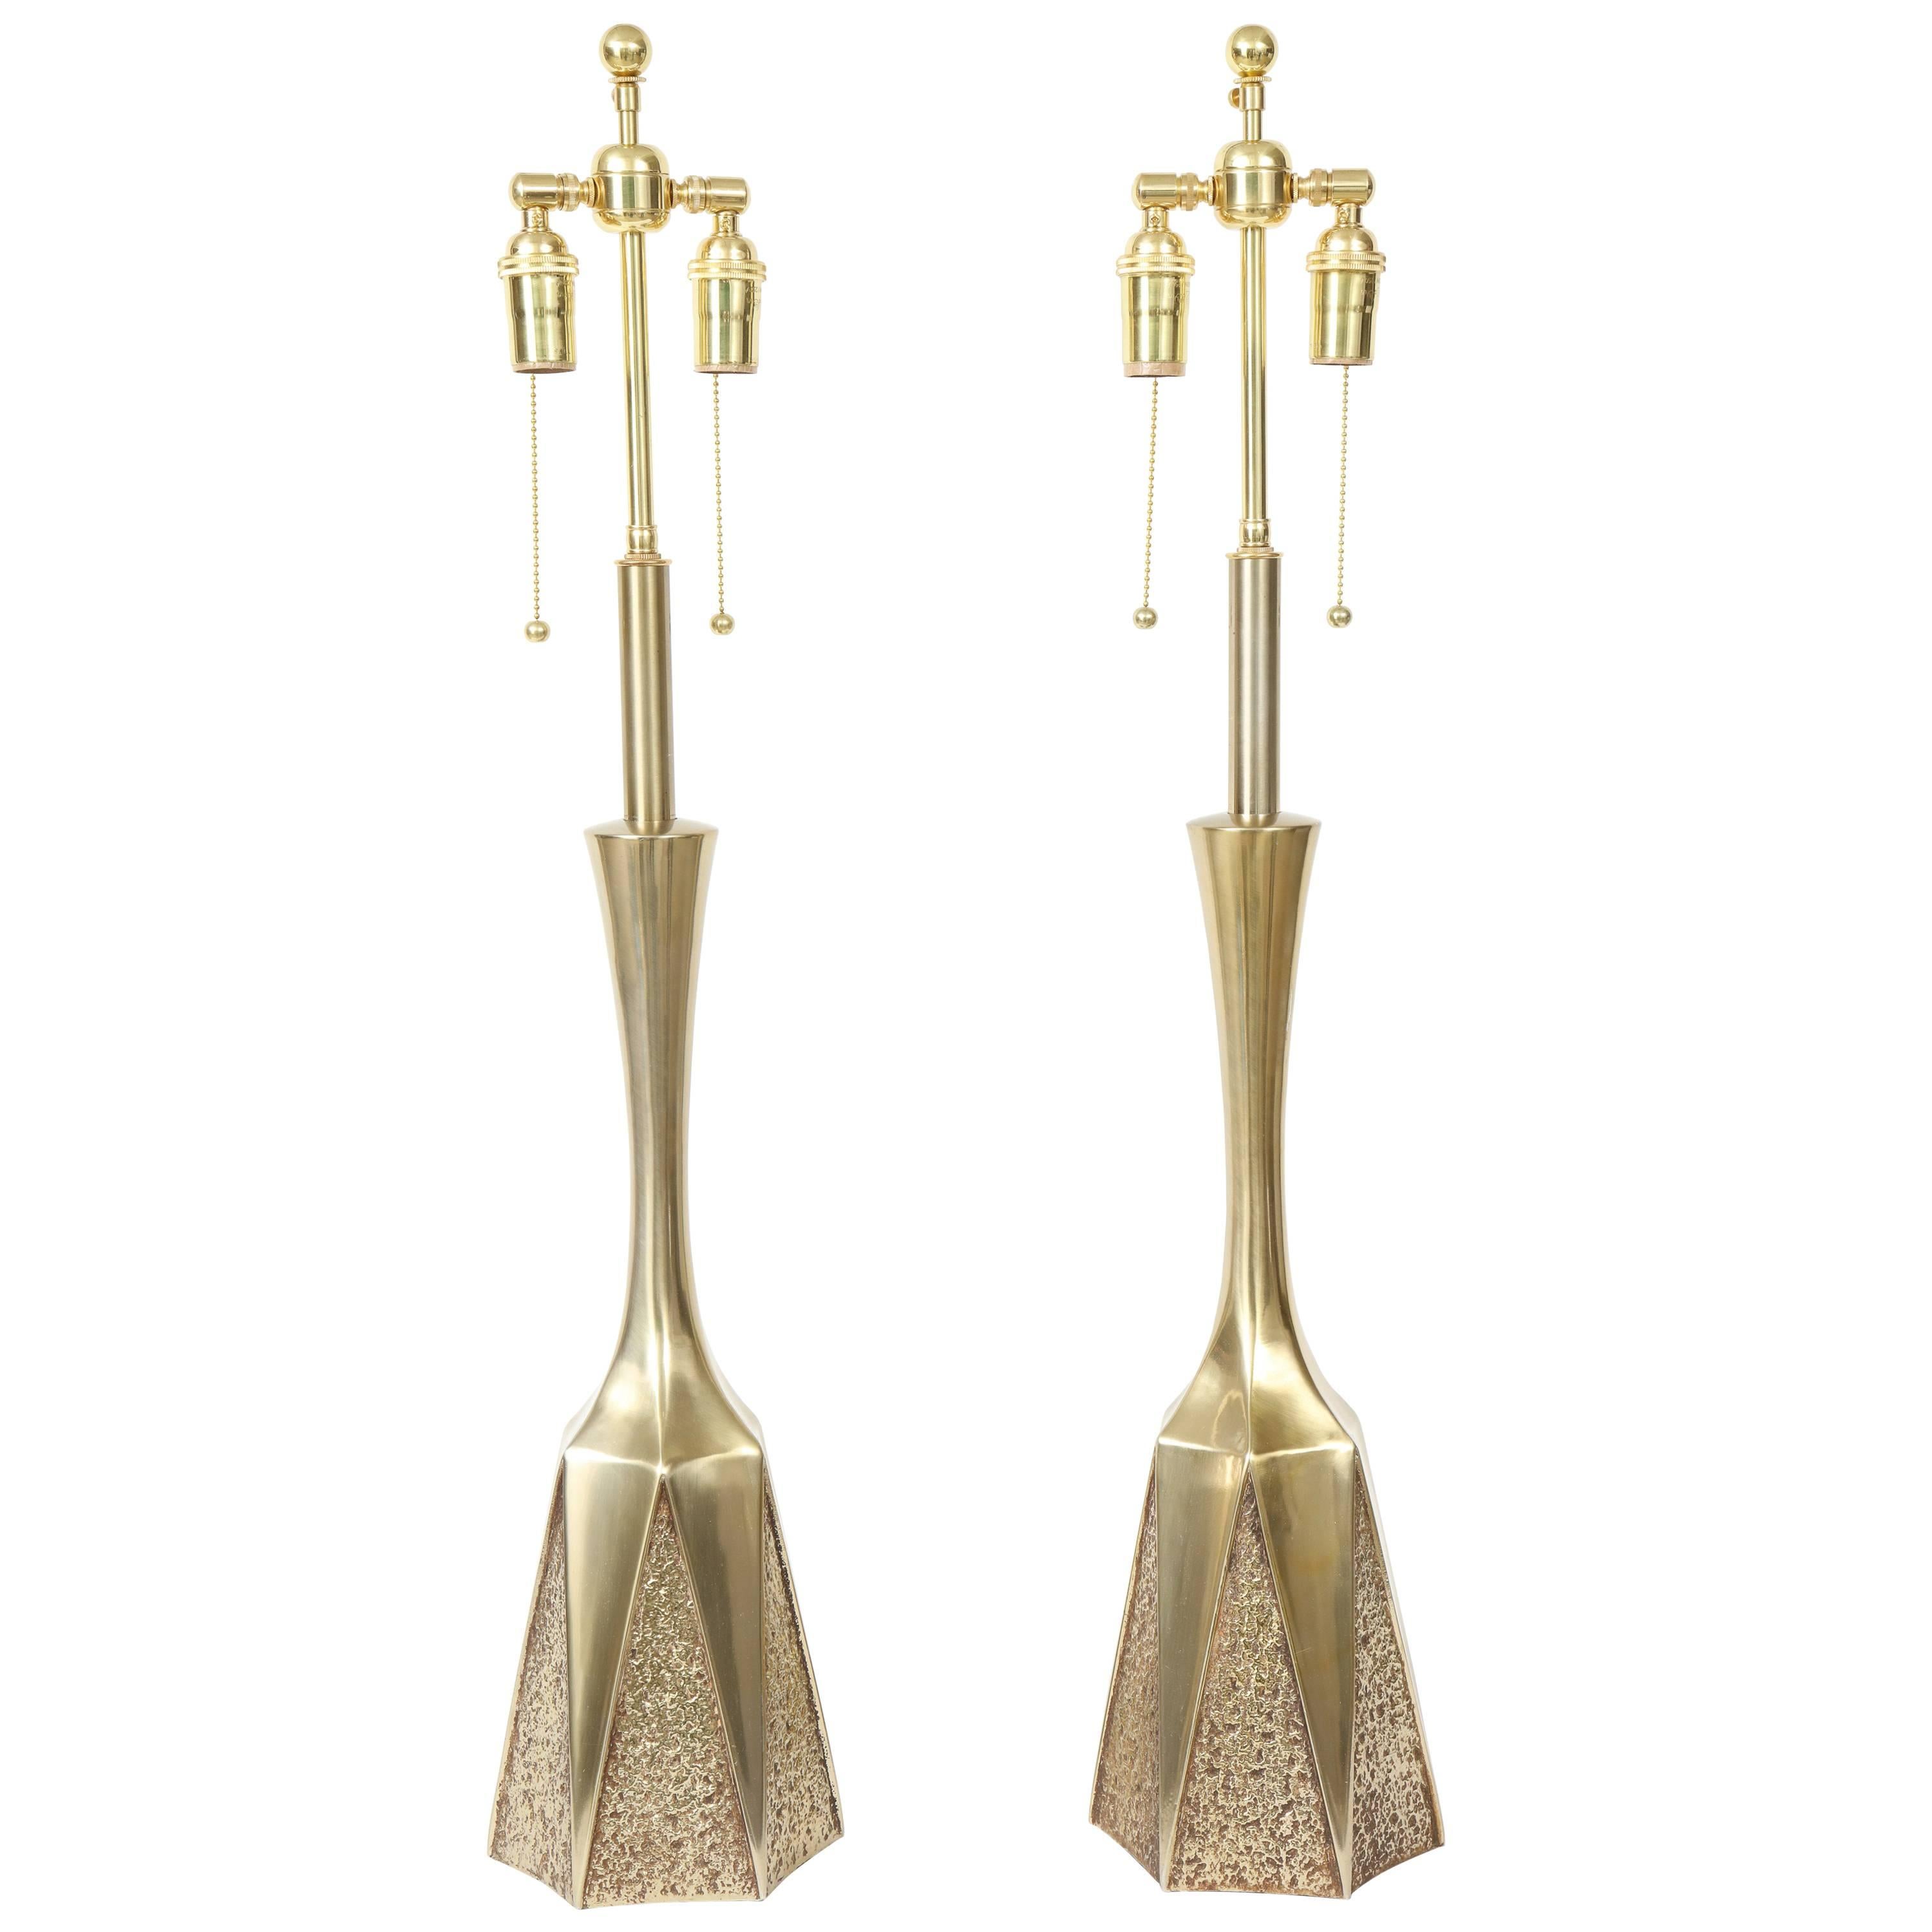 Pair of Brutalist Lamps by Laurel Lamp Company